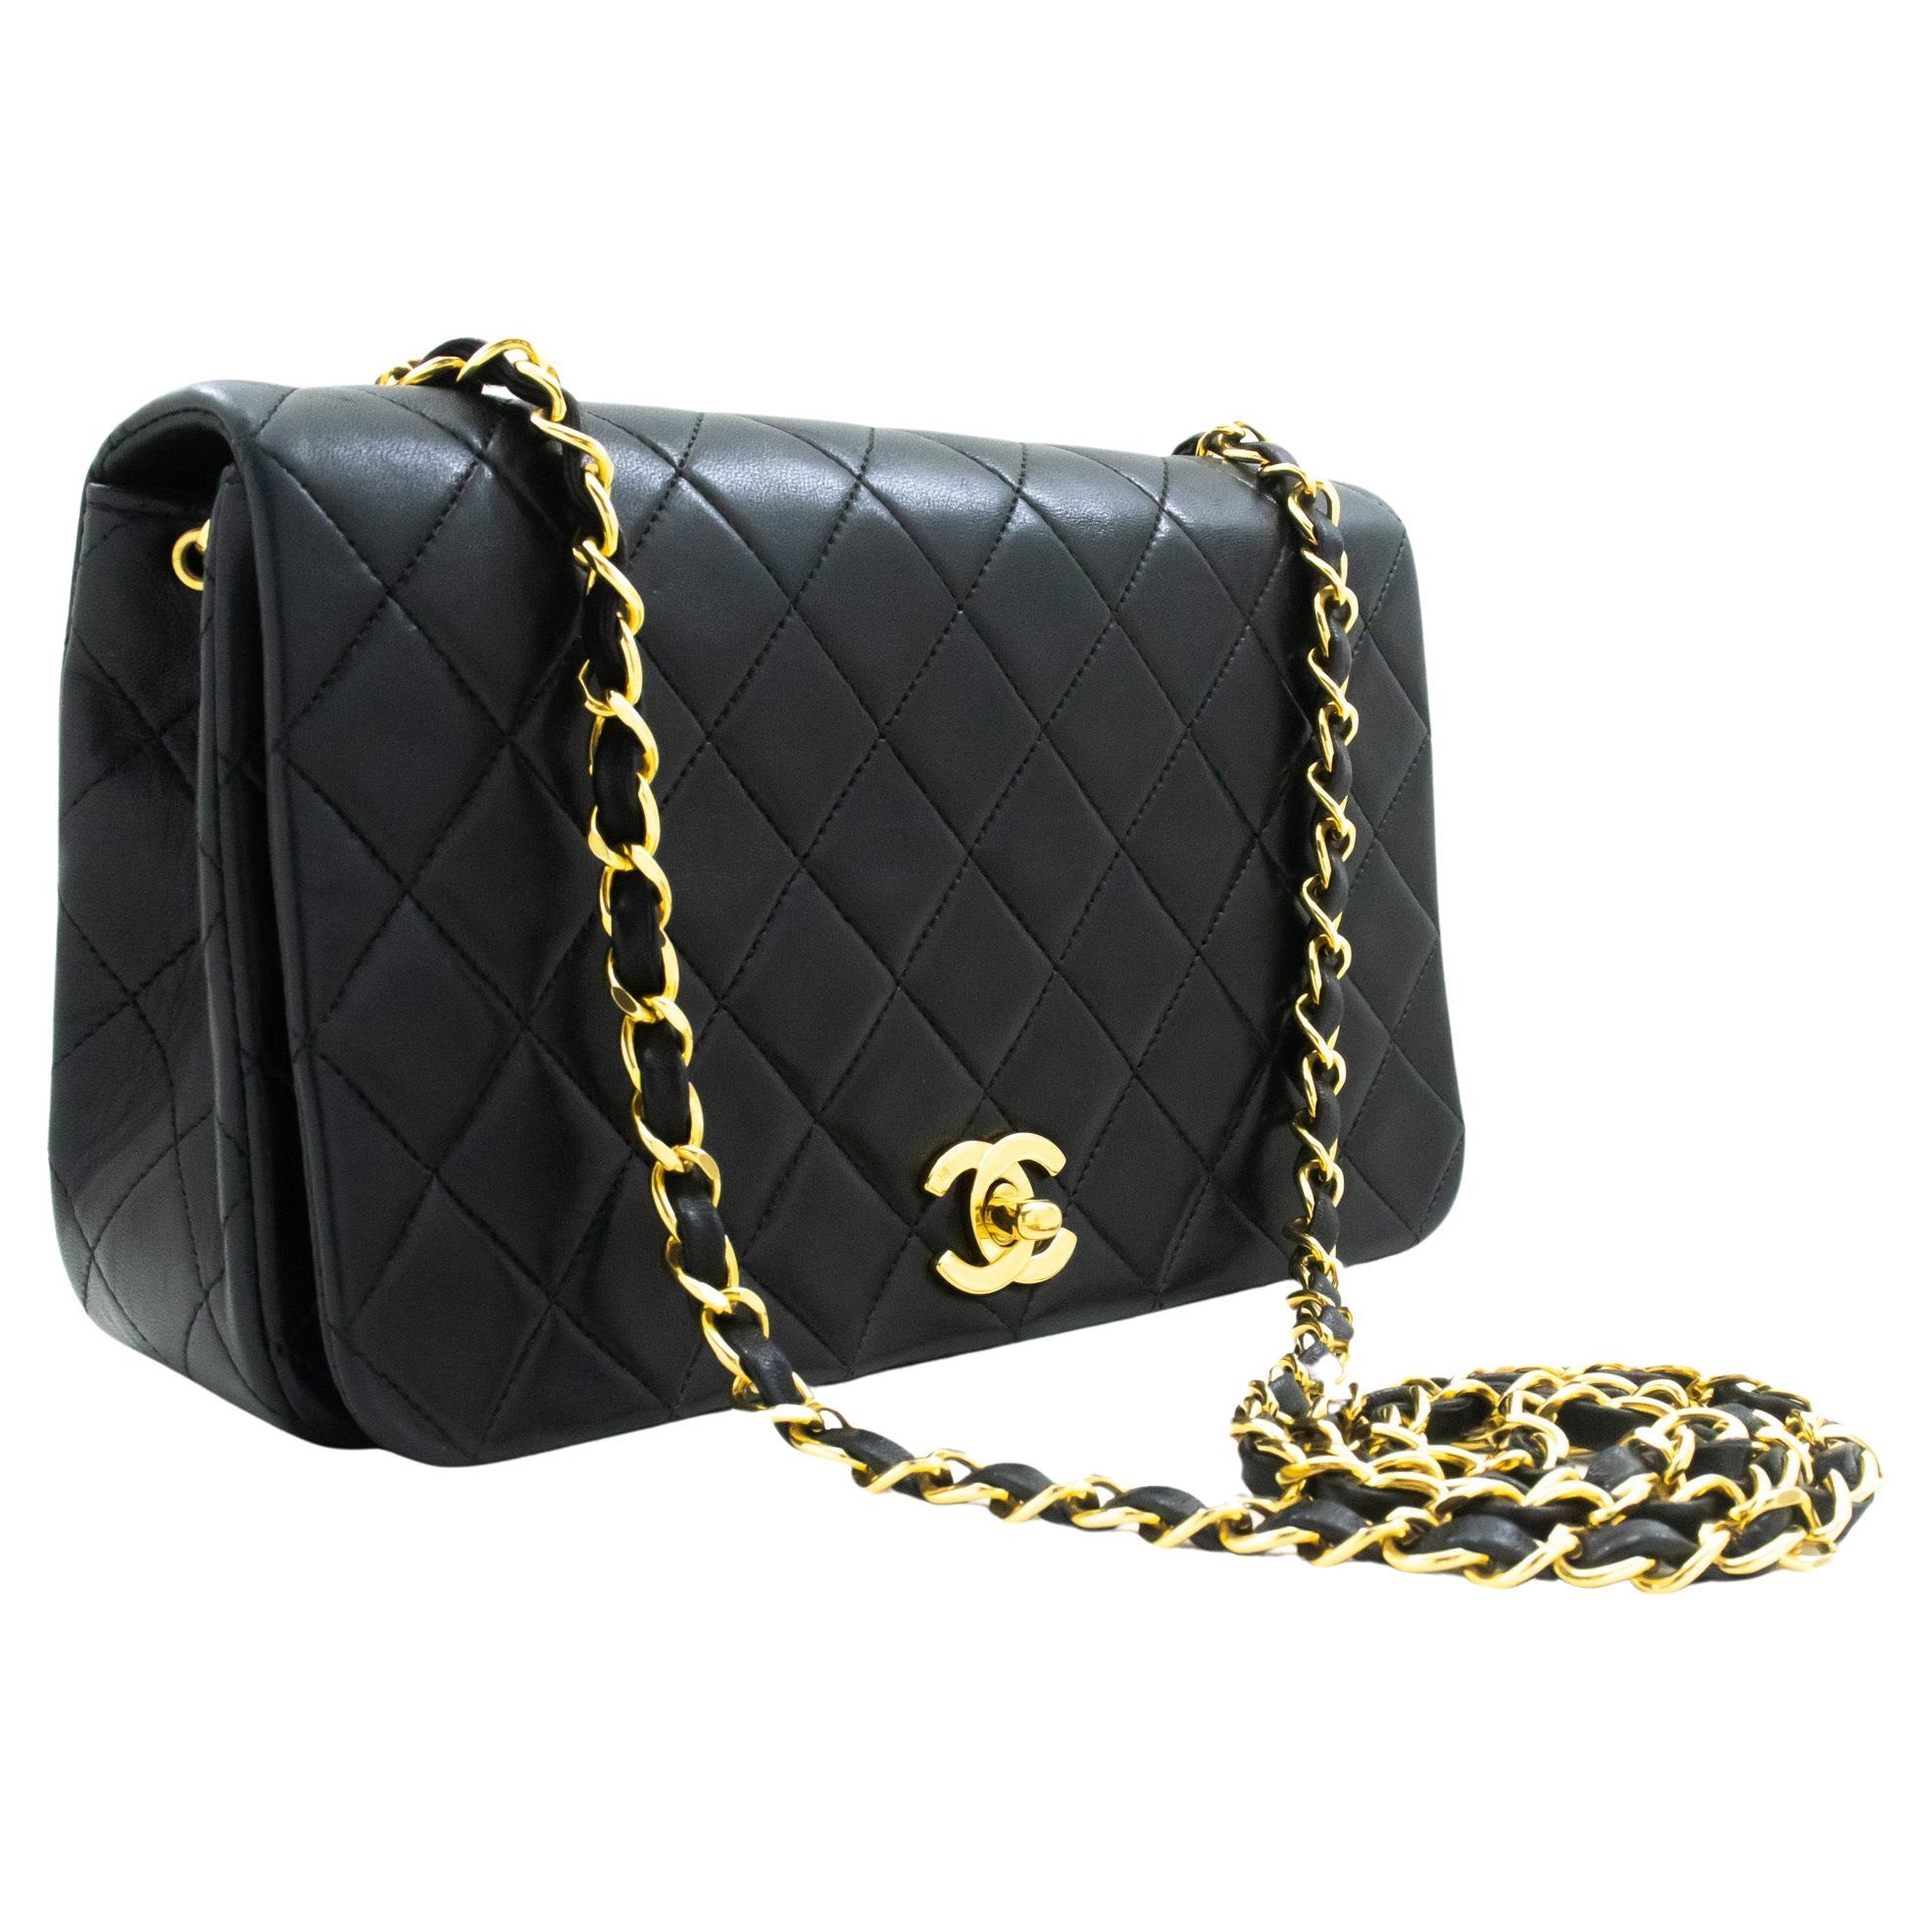 Why did Chanel discontinue the Single Flap bag?